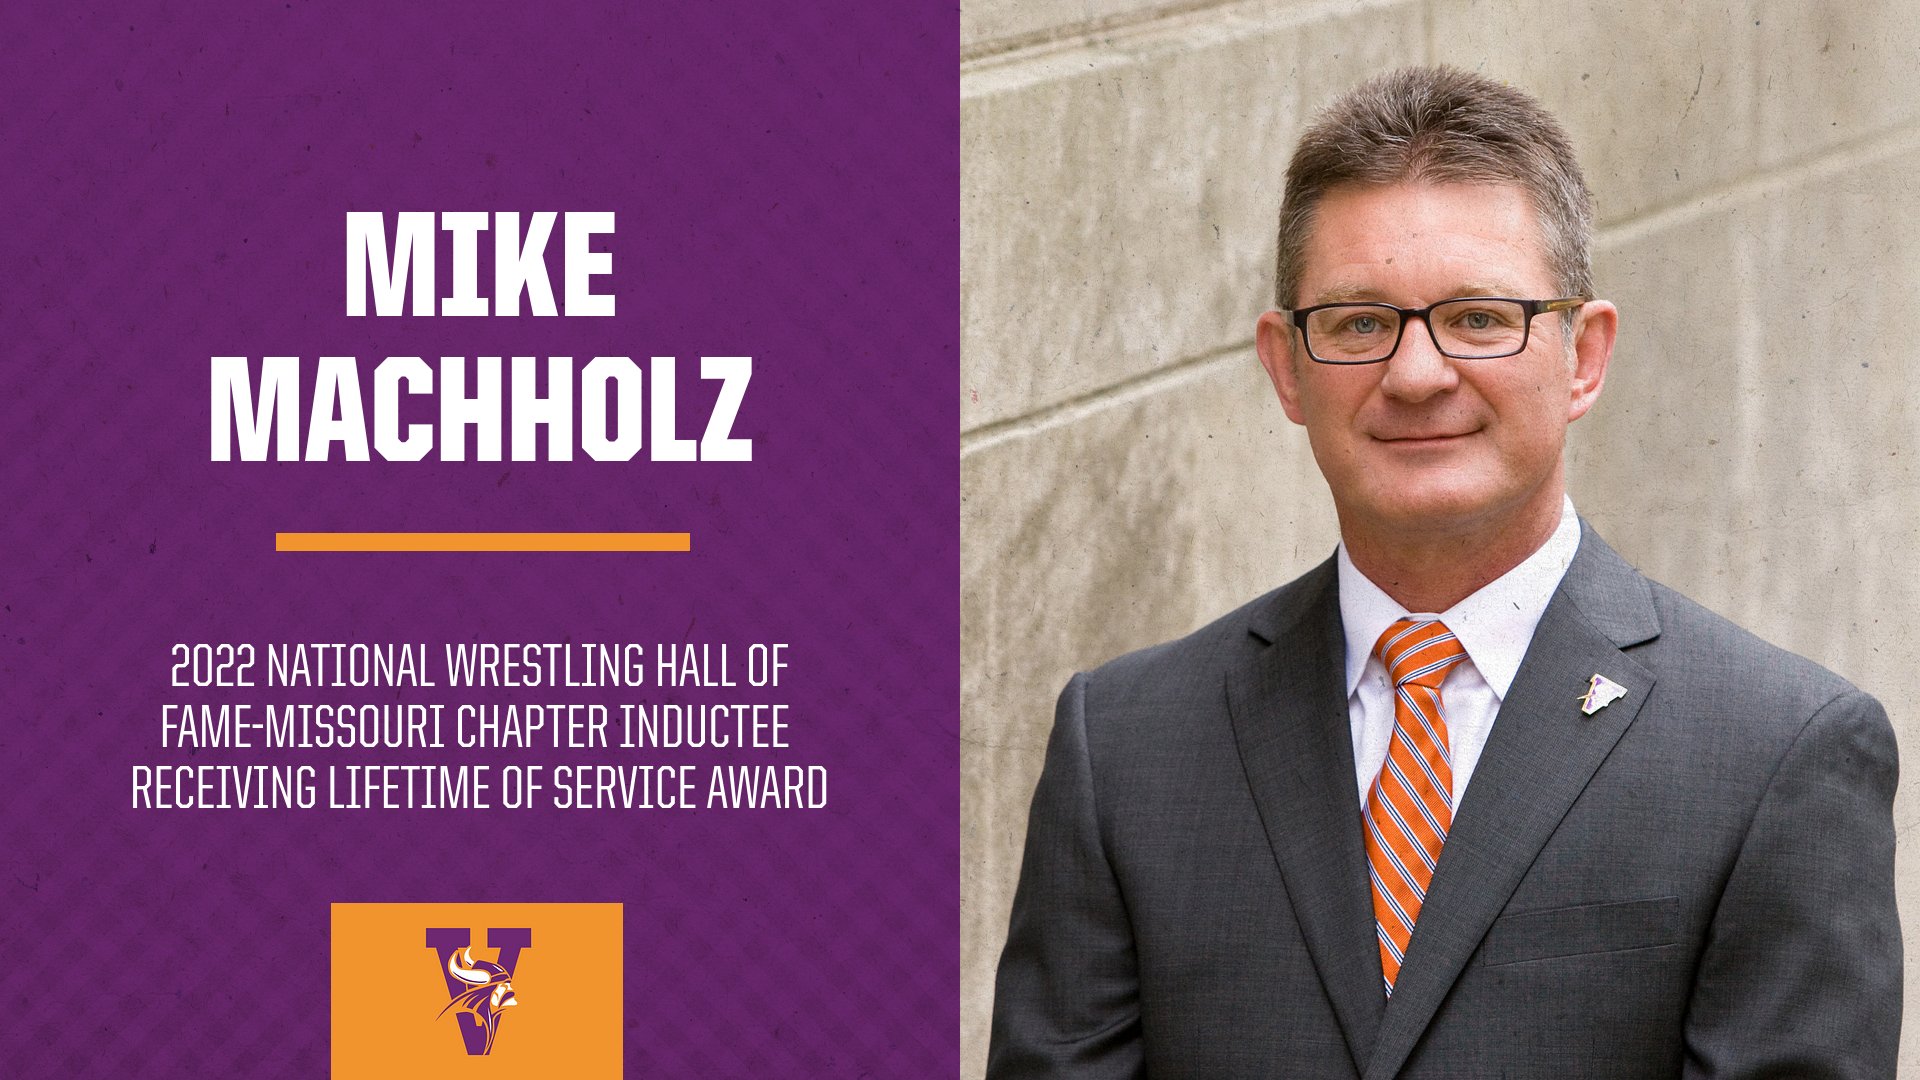 MISSOURI VALLEY COLLEGE ATHLETIC DIRECTOR, LONG-TIME MEN&rsquo;S WRESTLING HEAD COACH SELECTED FOR NATIONAL WRESTLING HALL OF FAME